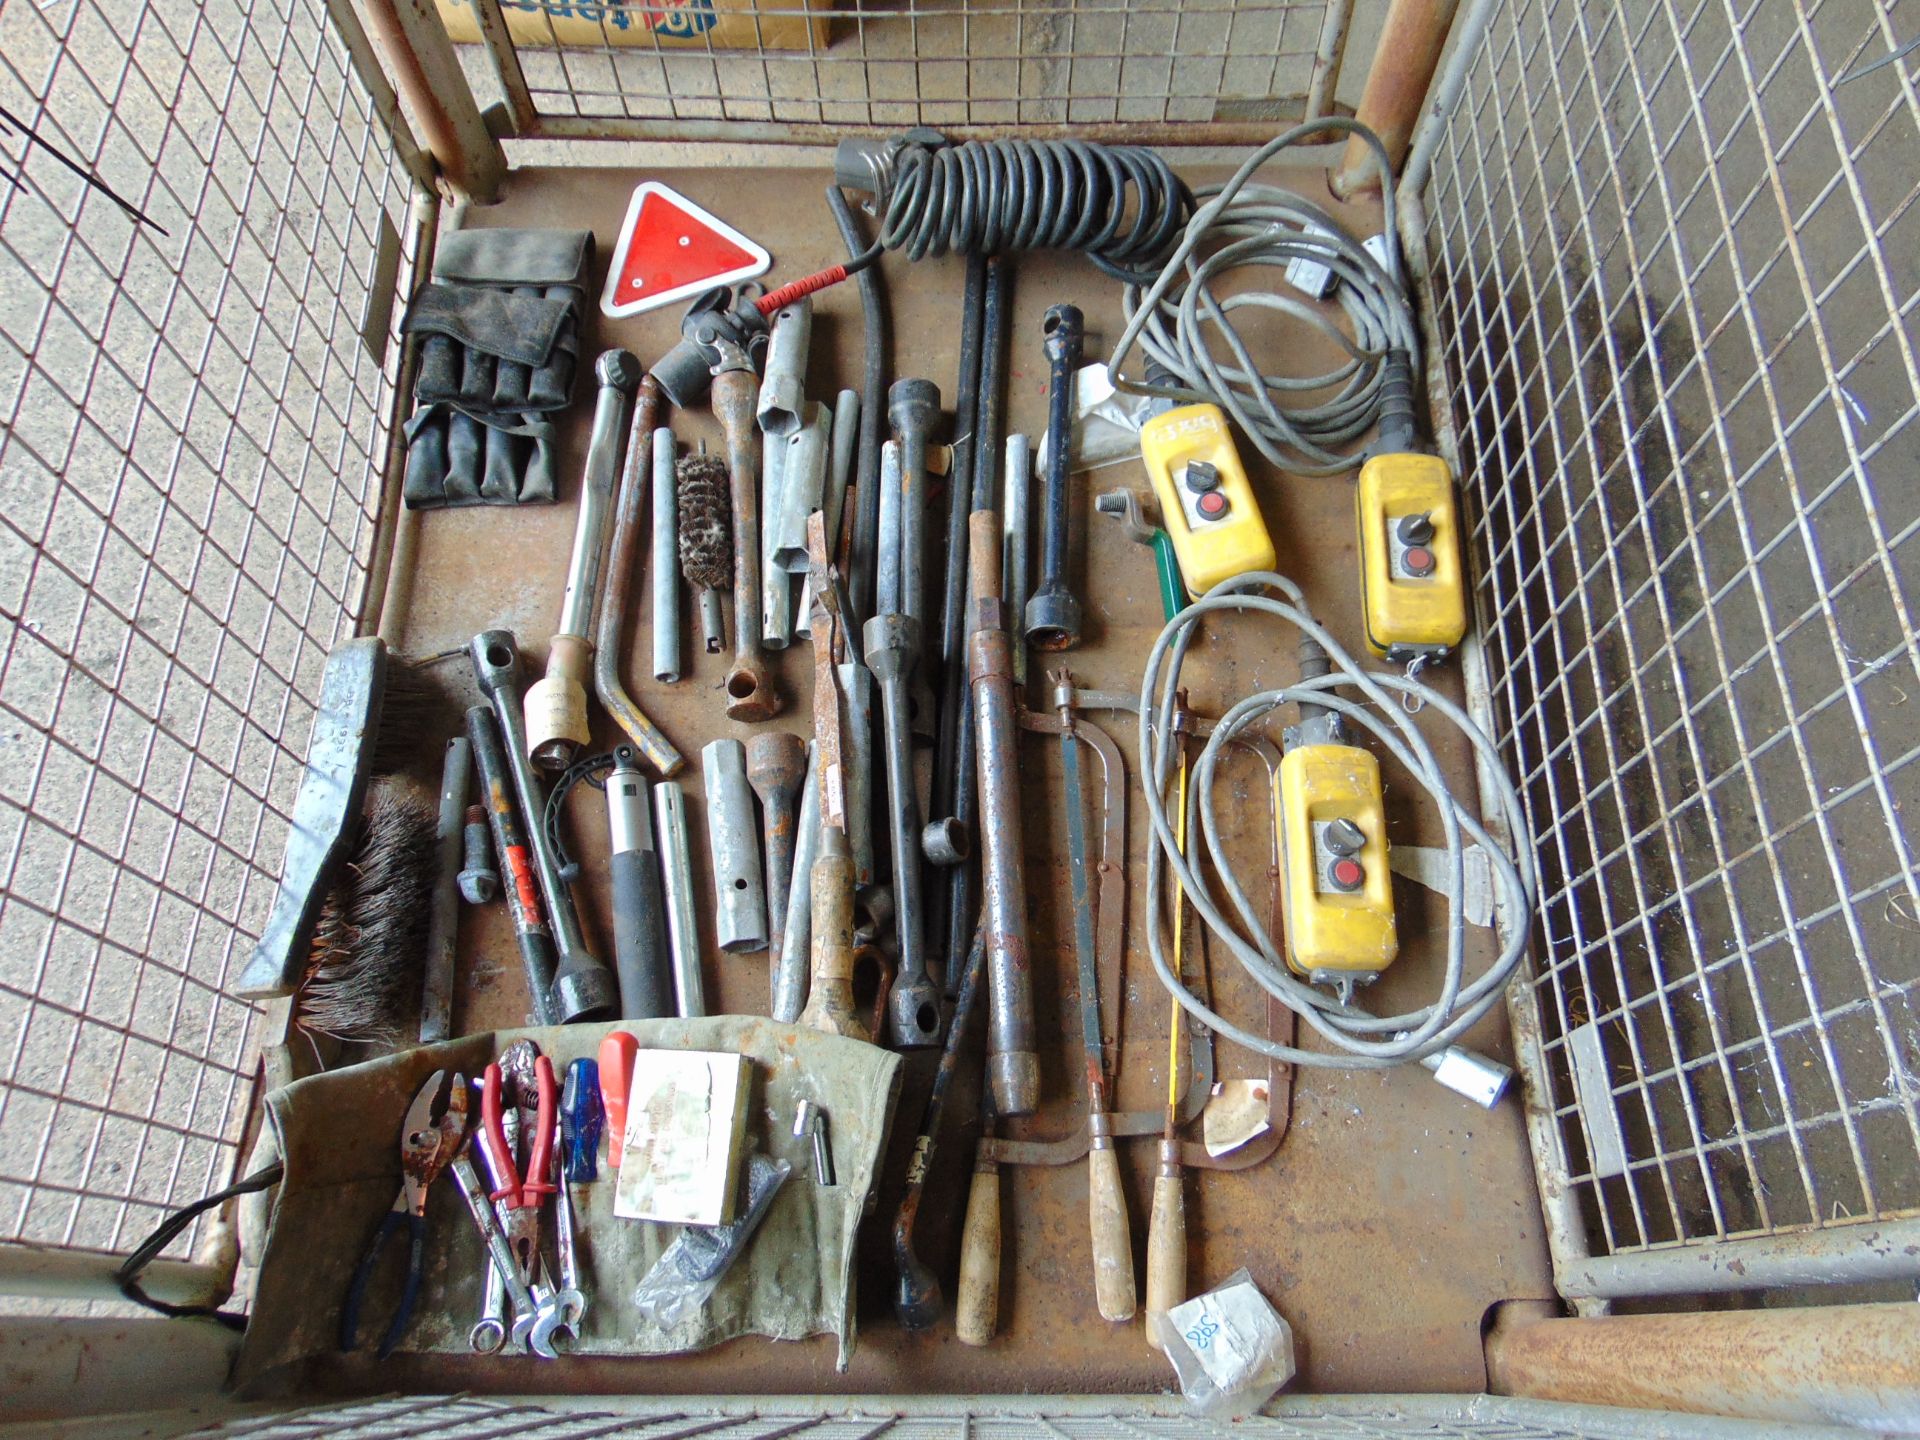 Stillage of Tools, Remote Controls, Trailer Electrical Connectors Eect - Image 4 of 4